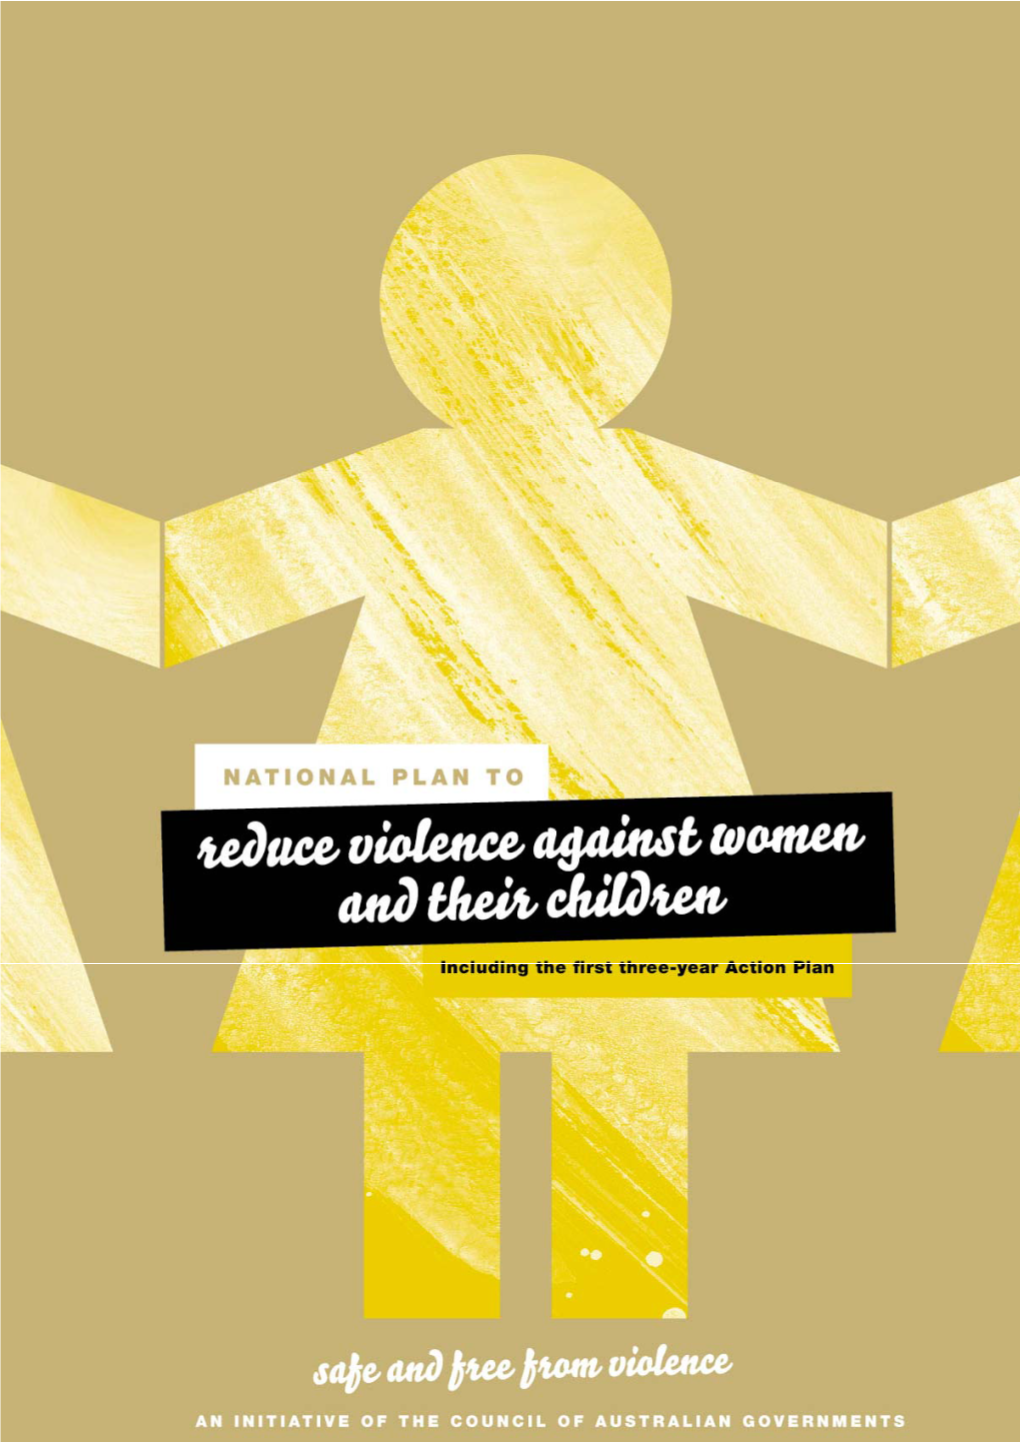 National Plan to Reduce Violence Against Women and Their Children